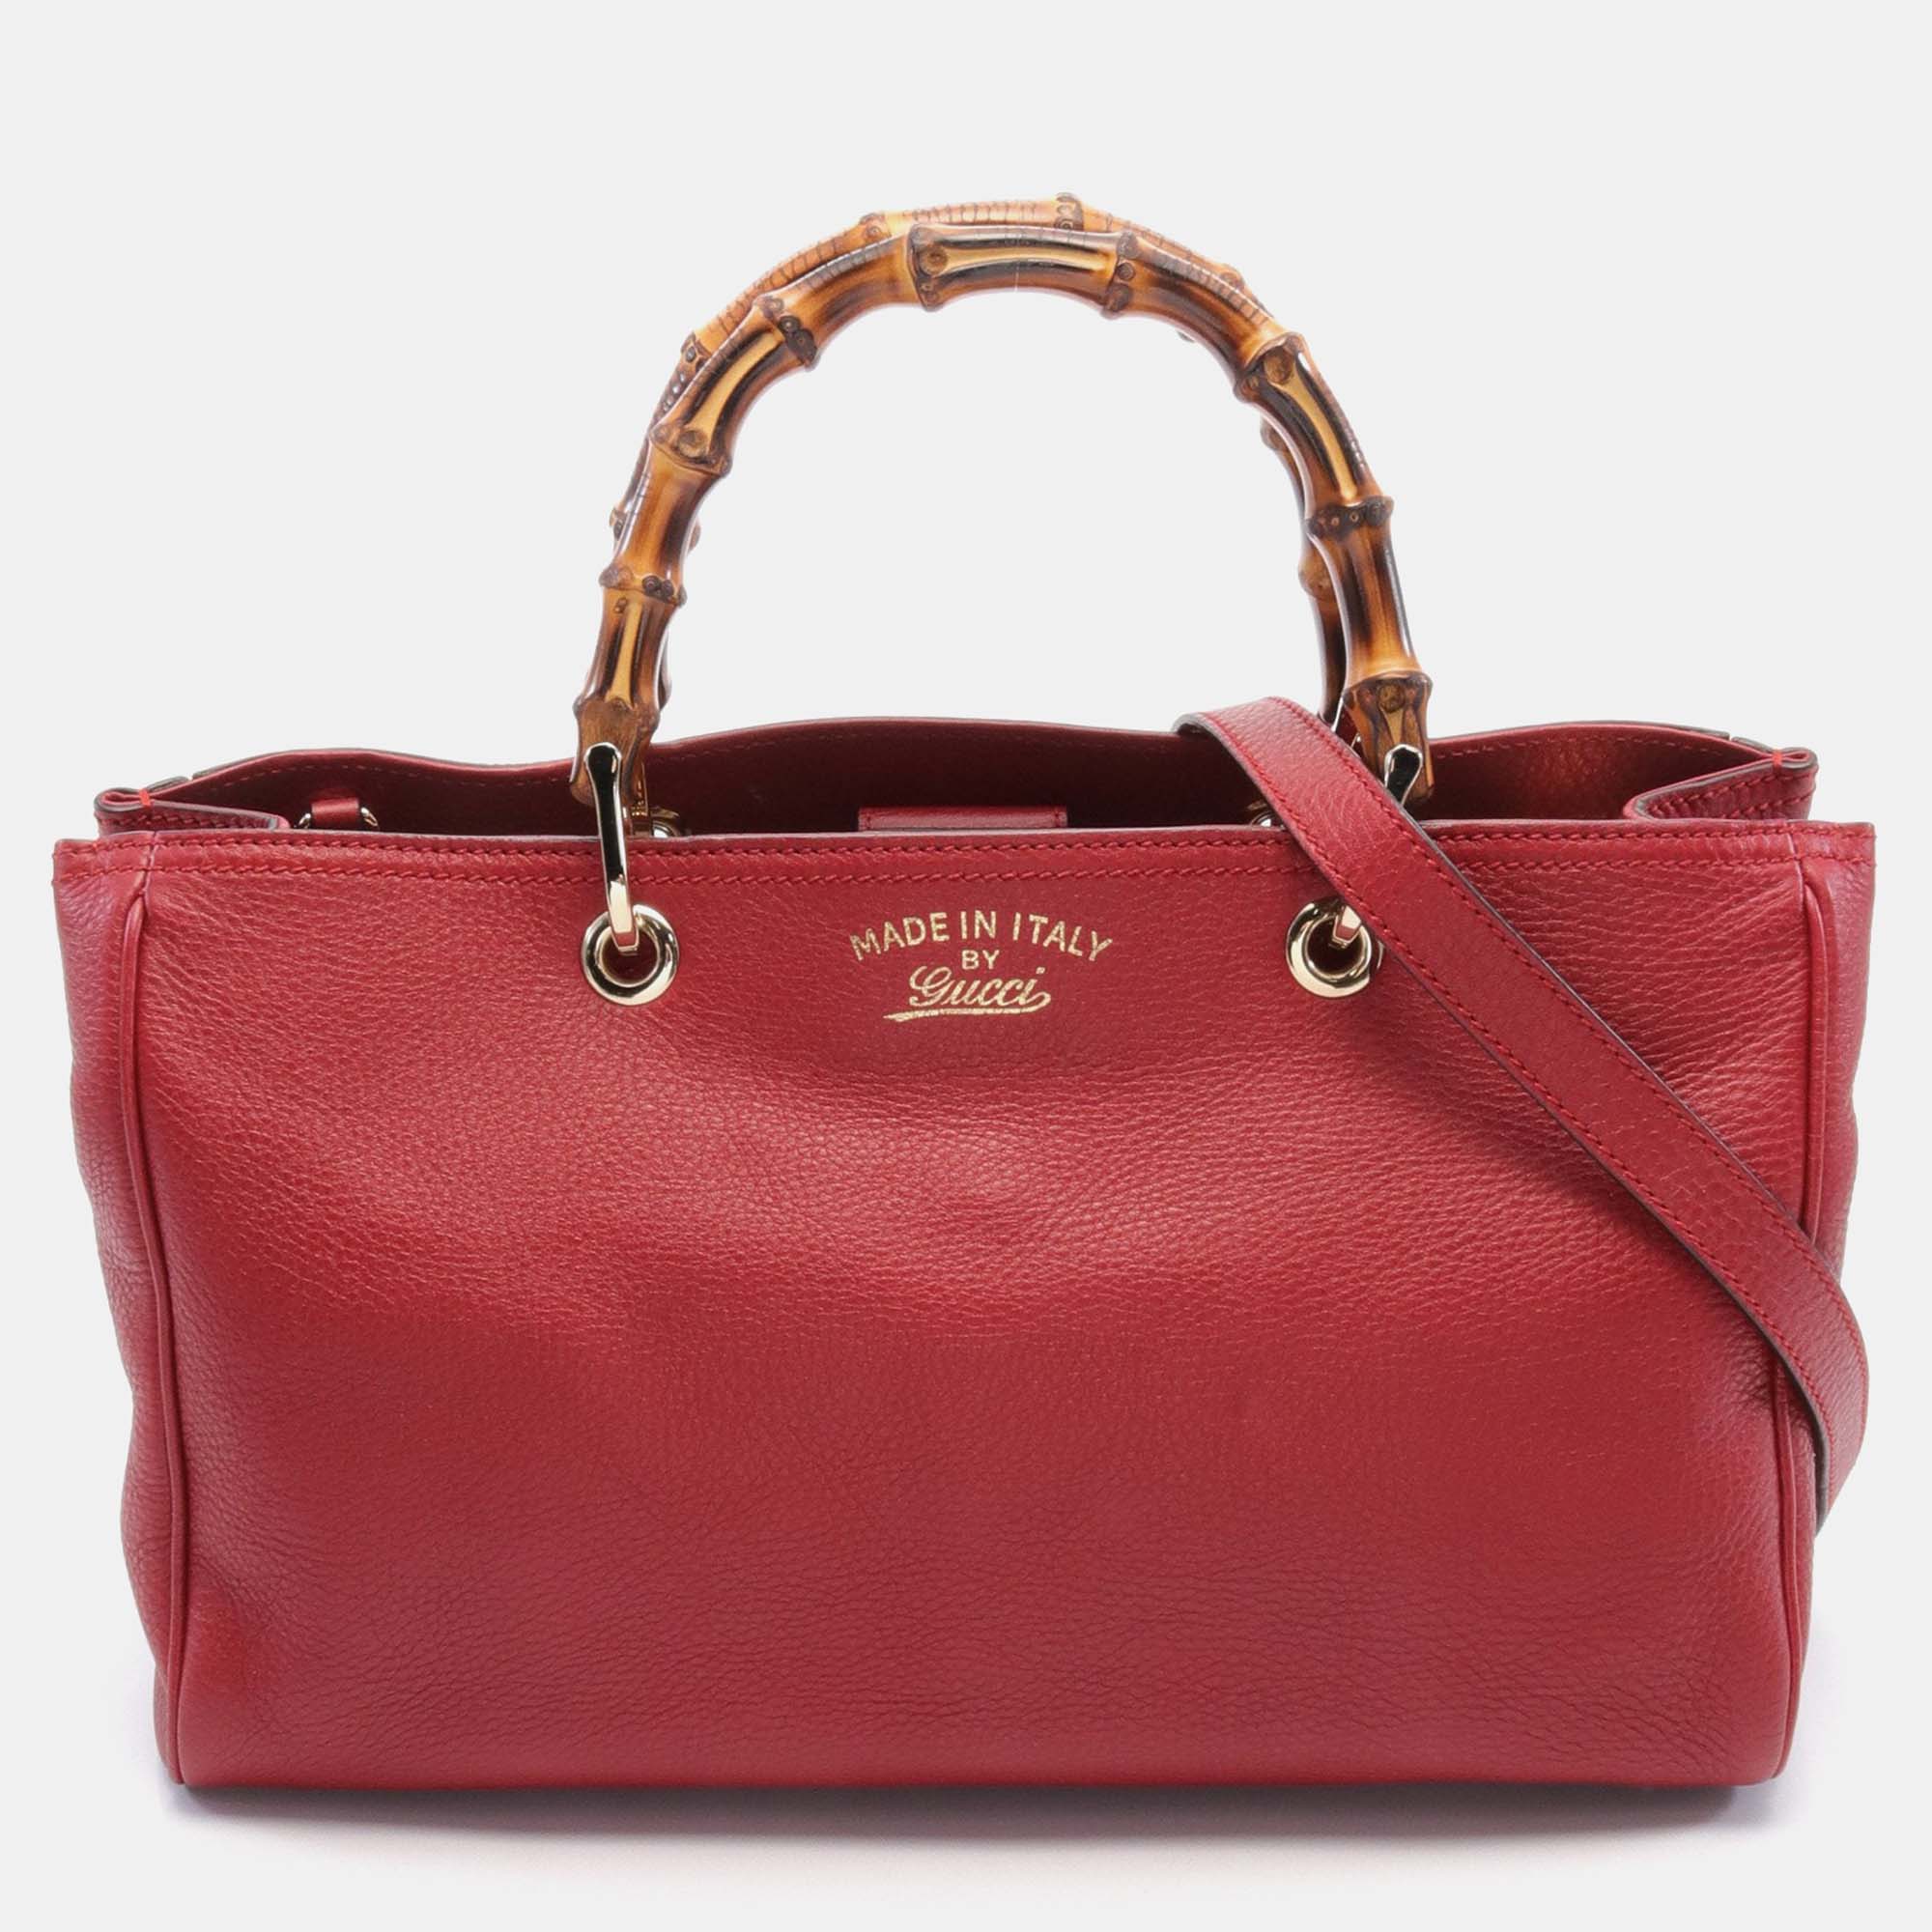 Pre-owned Gucci Bamboo Shopper Medium Handbag Tote Bag Leather Red 2way